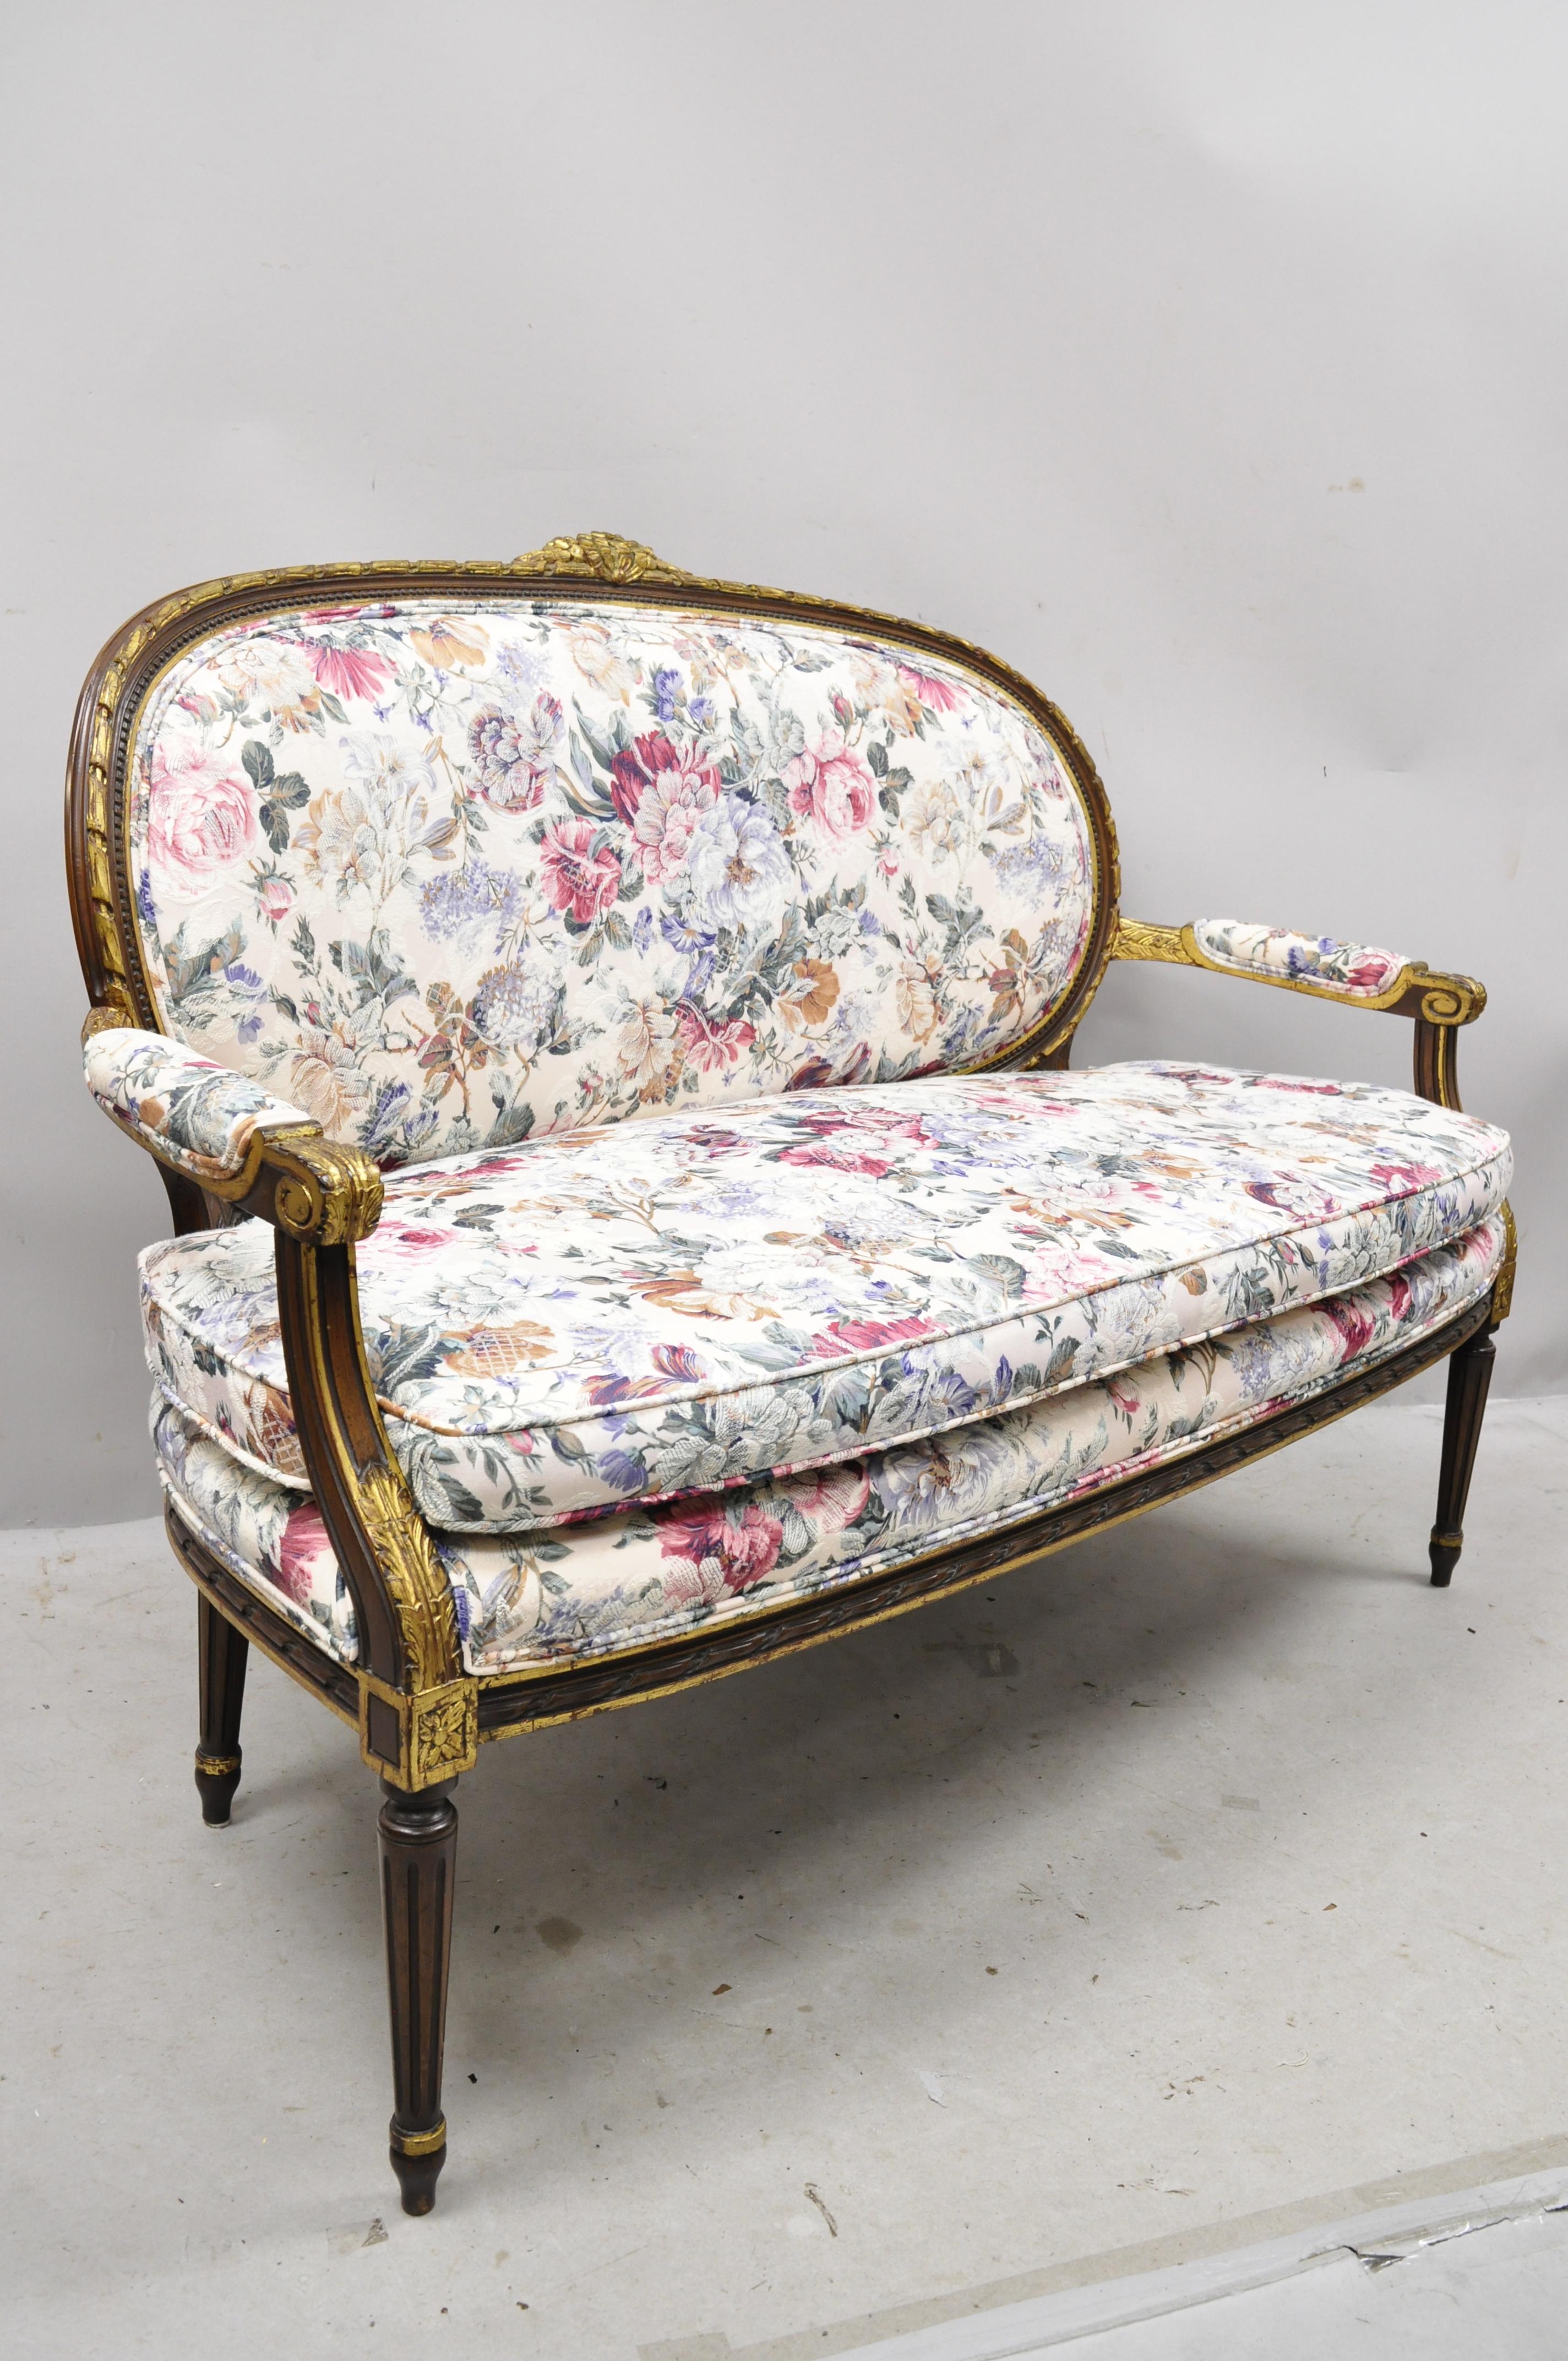 Vintage French Louis XVI Gold Giltwood Floral Upholstered Loveseat Settee Sofa 6